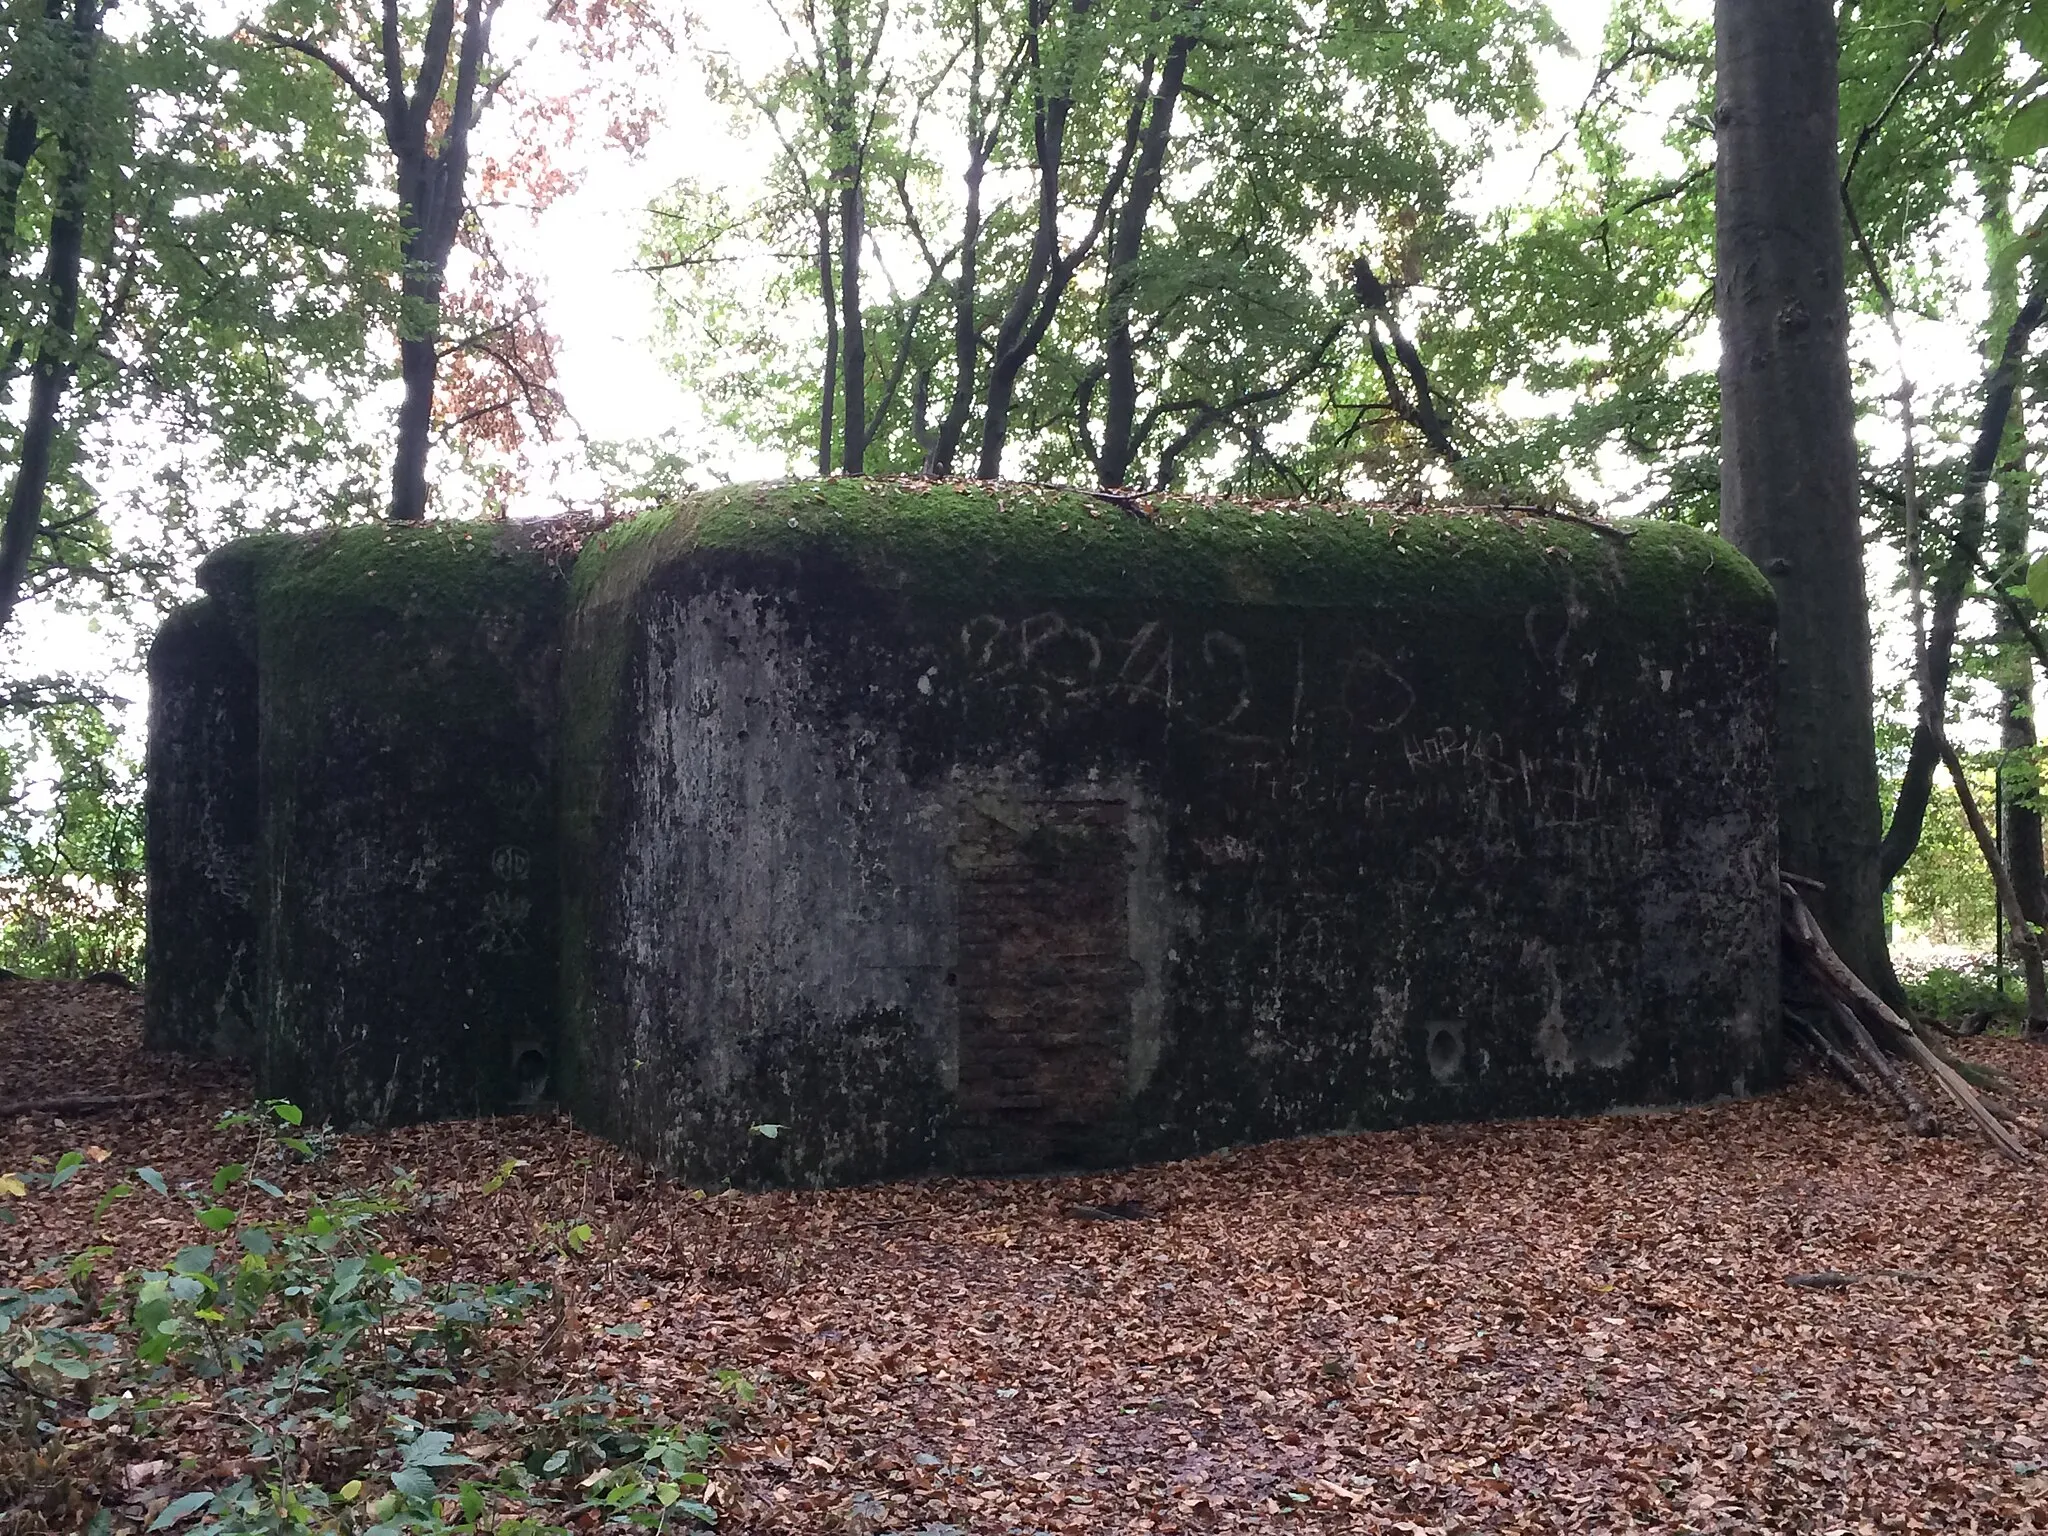 Photo showing: Bunker of the Belgian "K-W line" of fortifications, built in the 1930's near Wavre. The door was walled by the Germans after Belgium's defeat in 1940.